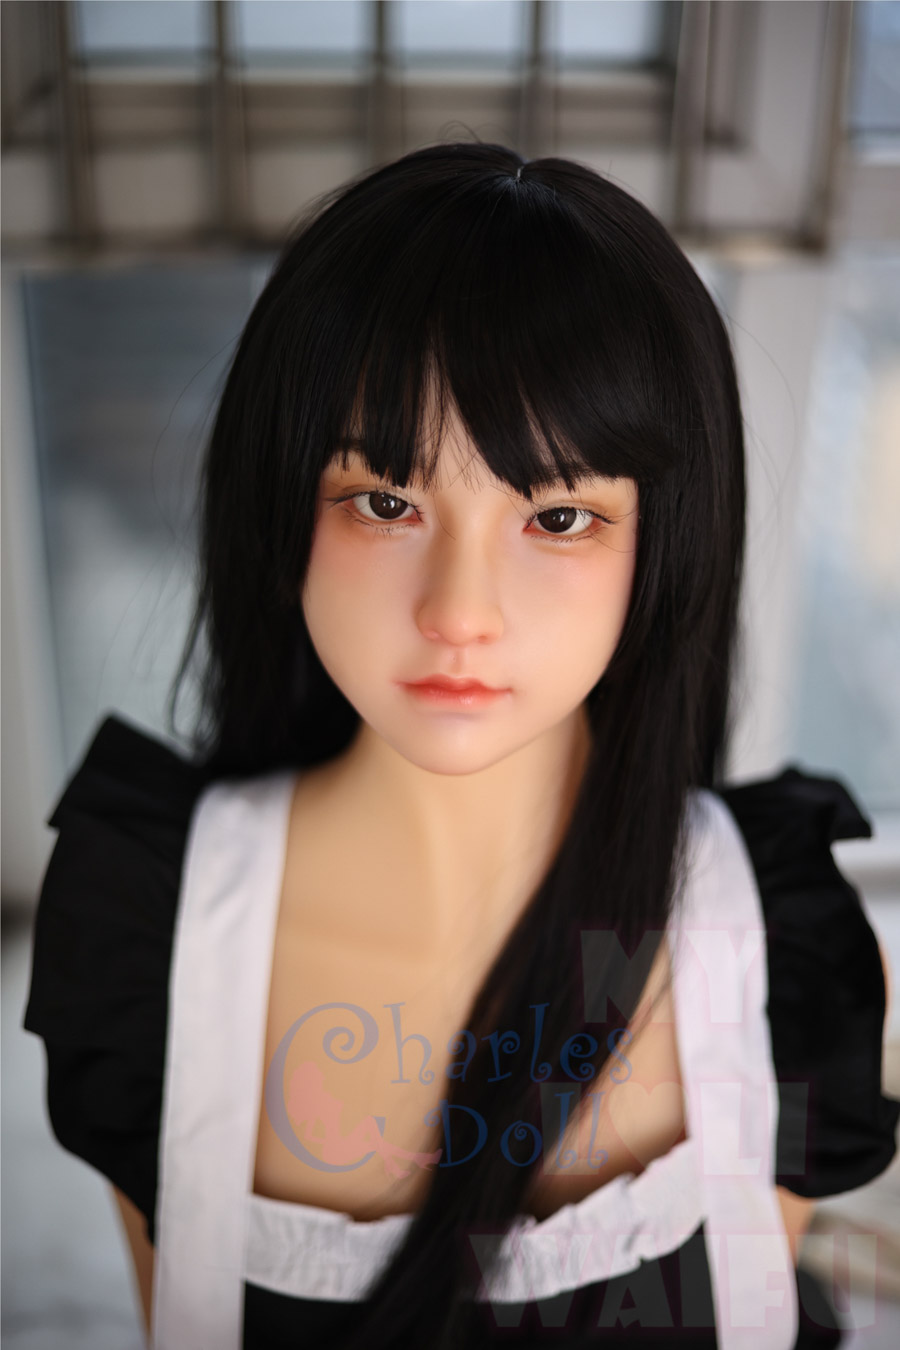 MLW-doll 150D 莉央 Rio